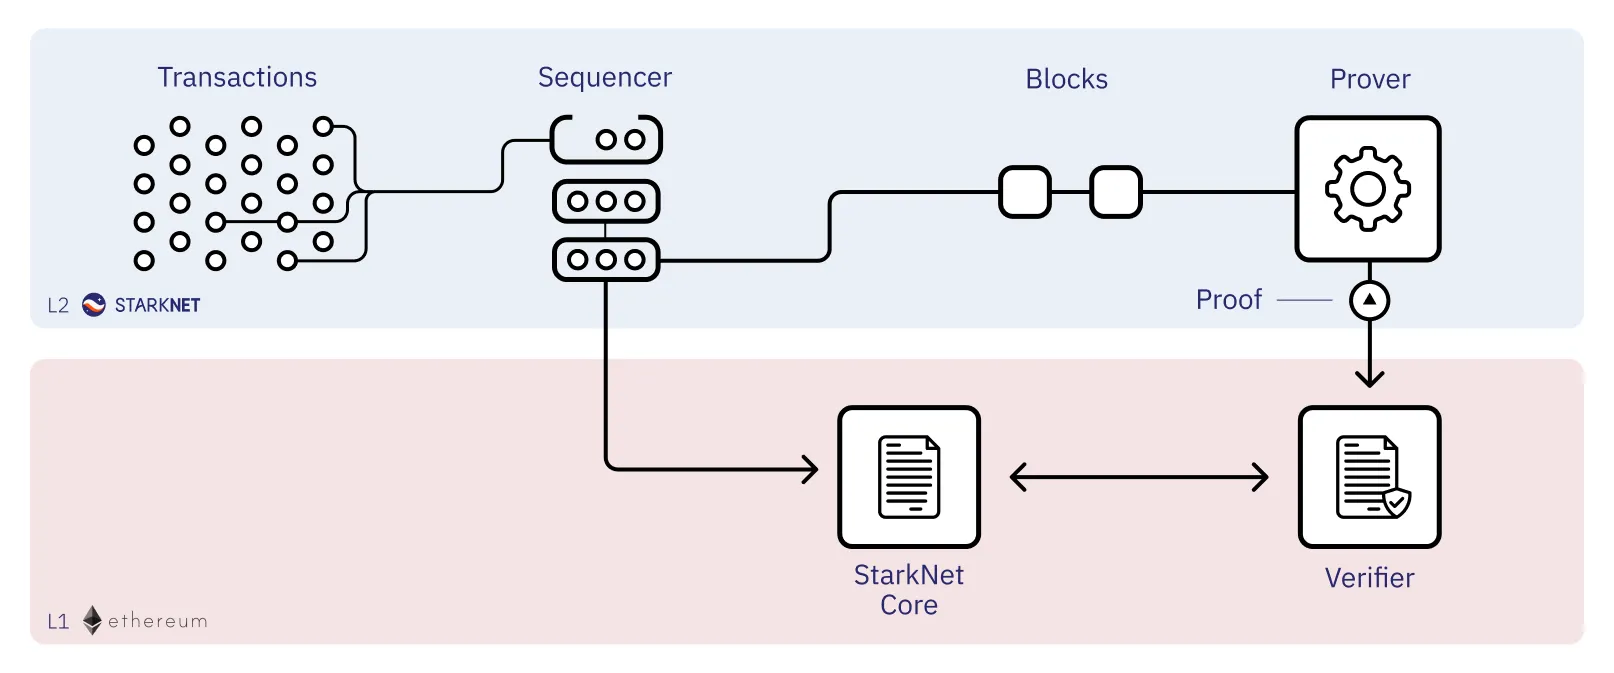 Sequencer role in the Starknet network